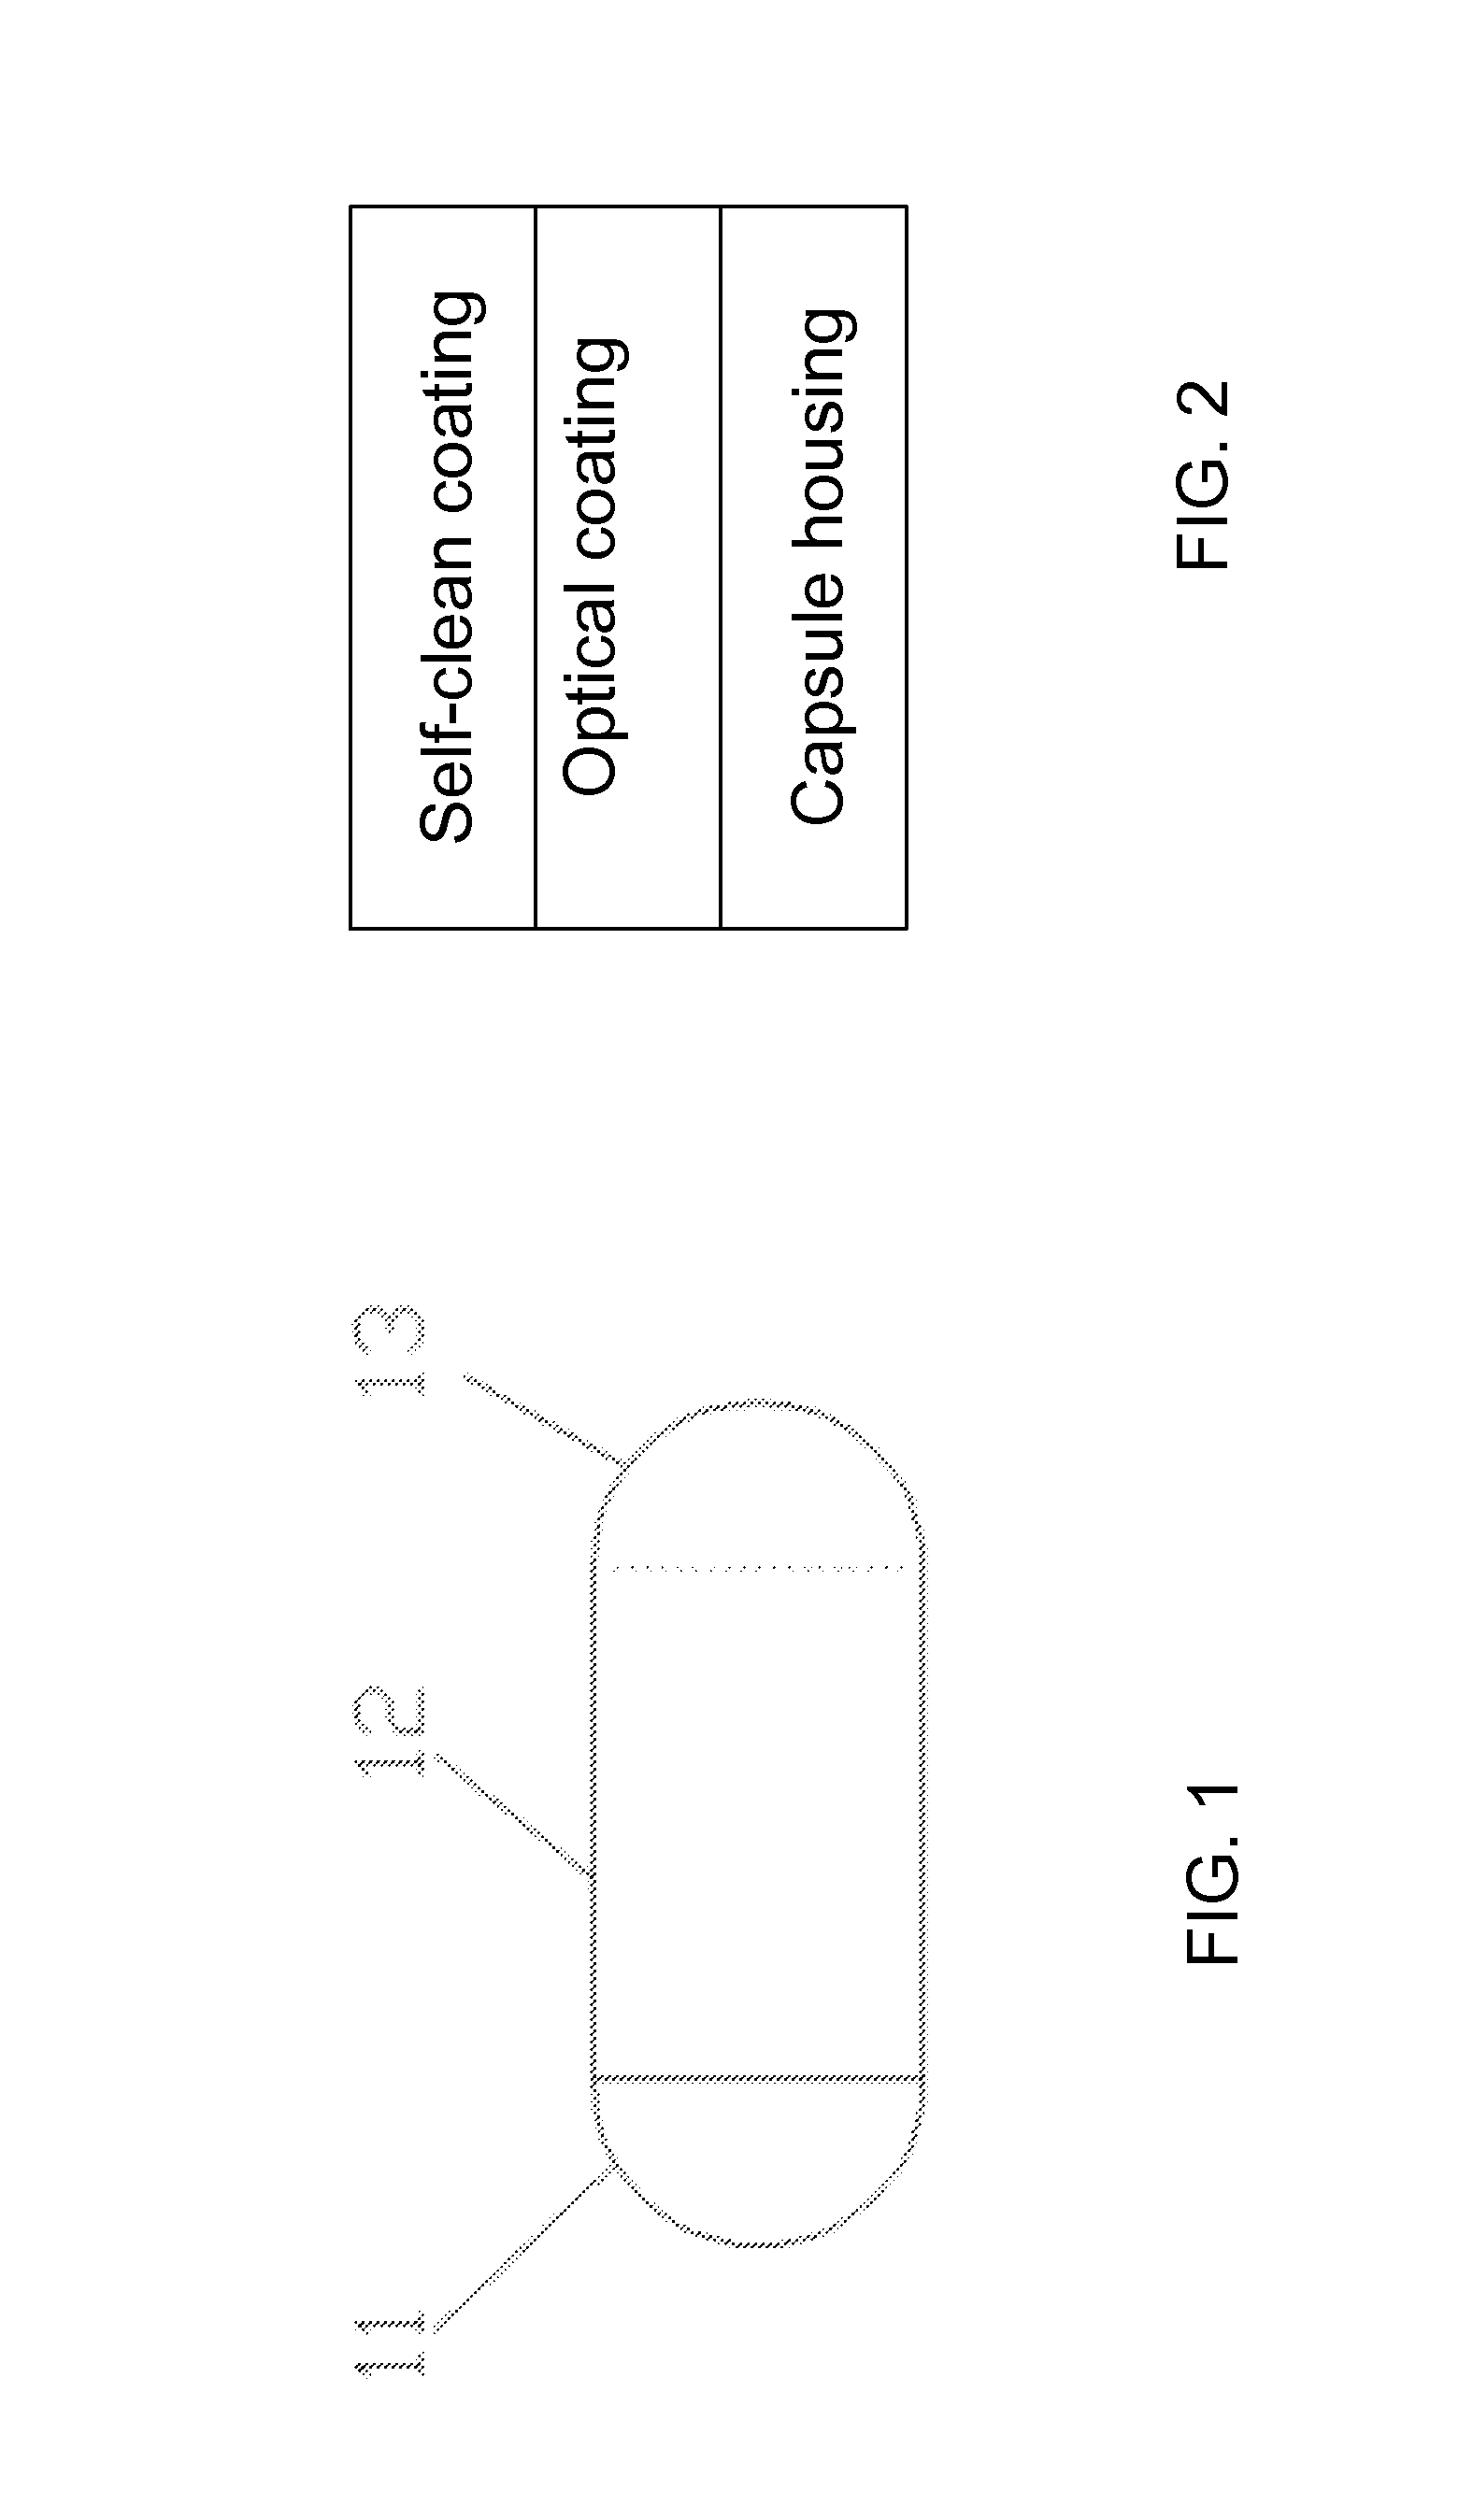 Capsule endoscope having a self-cleaning surface and method of using the same